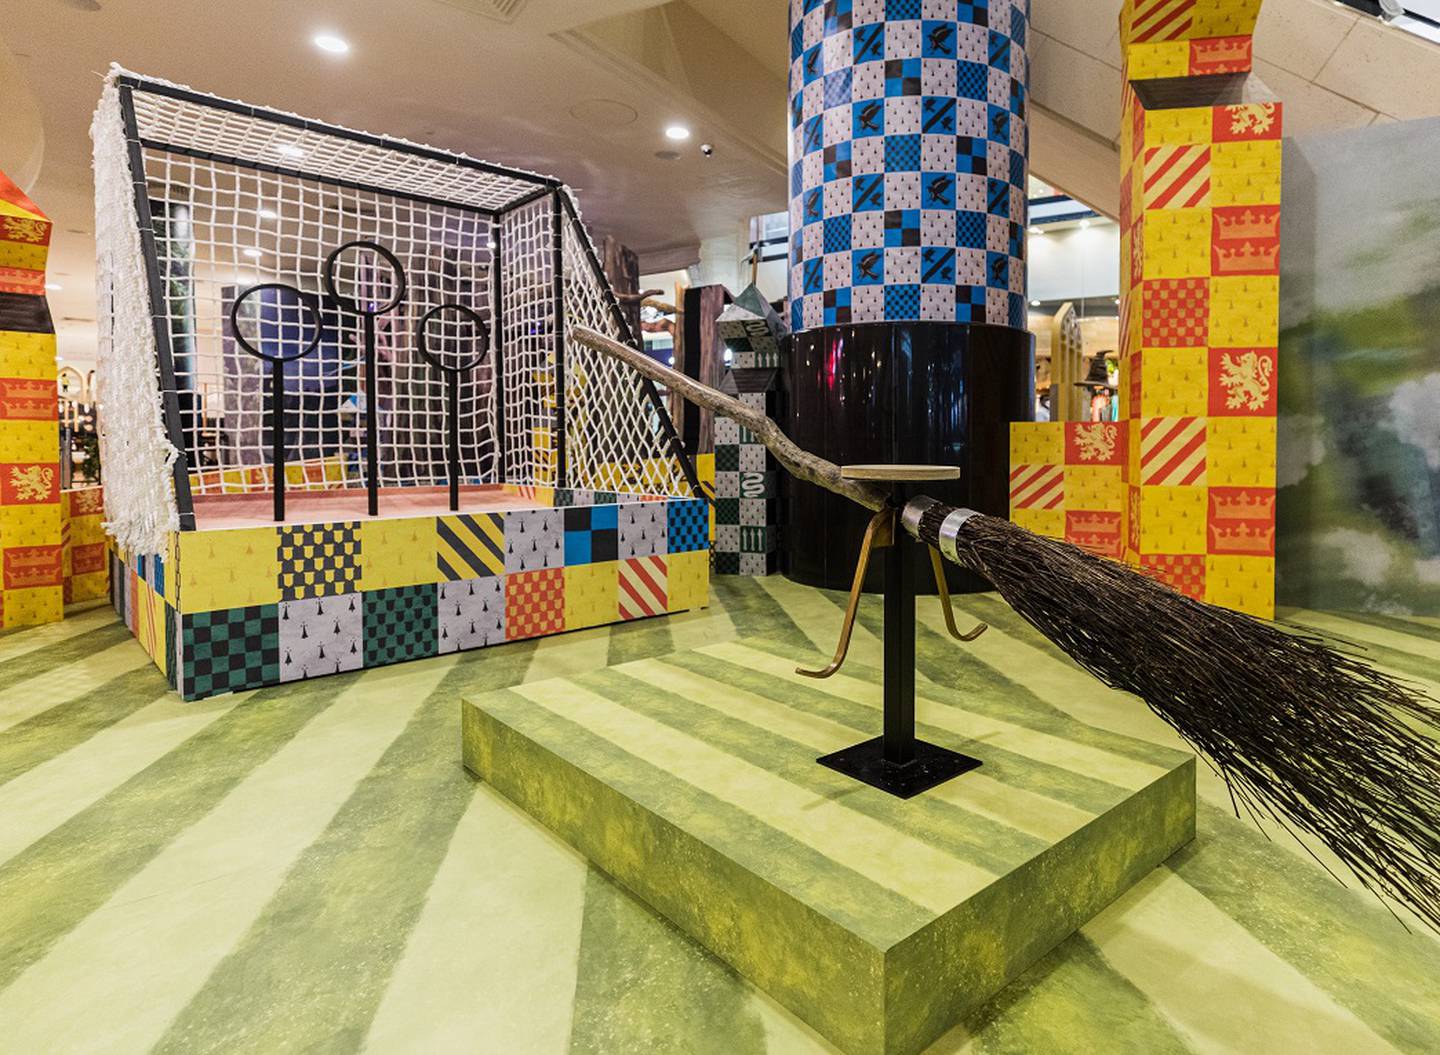 Visitors will be able to play a game of quidditch at Harry Potter: Celebrate Hogwarts in Abu Dhabi Mall. Photo: Abu Dhabi Mall